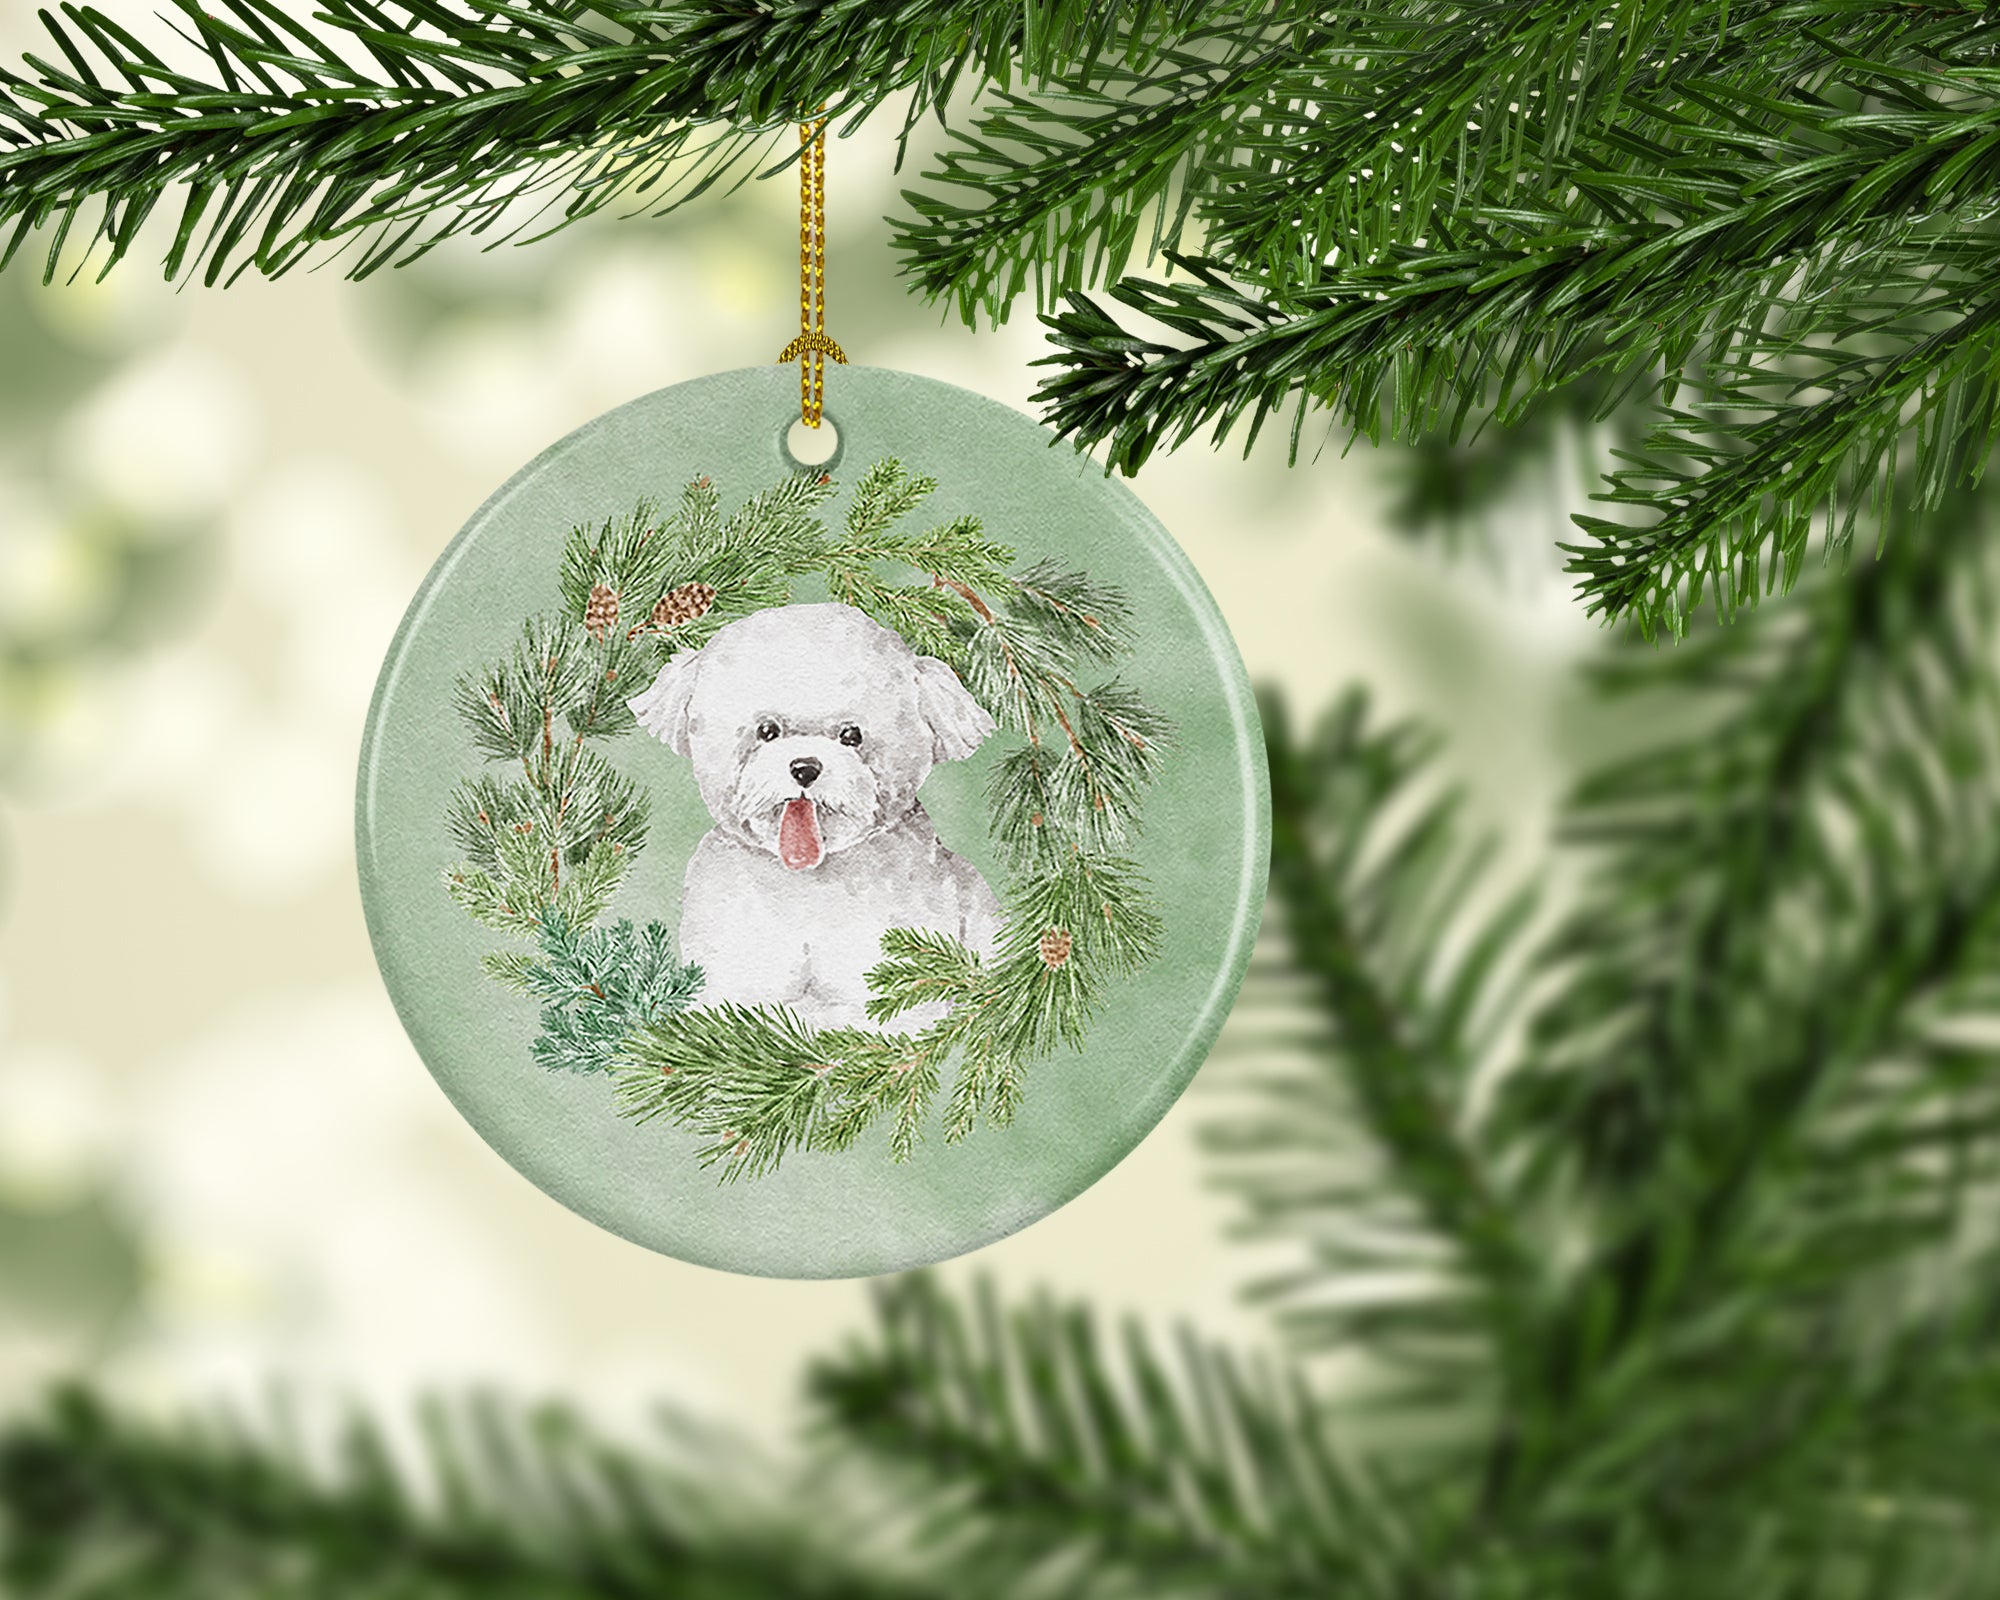 Buy this Bichon Frise Tongue Out Christmas Wreath Ceramic Ornament